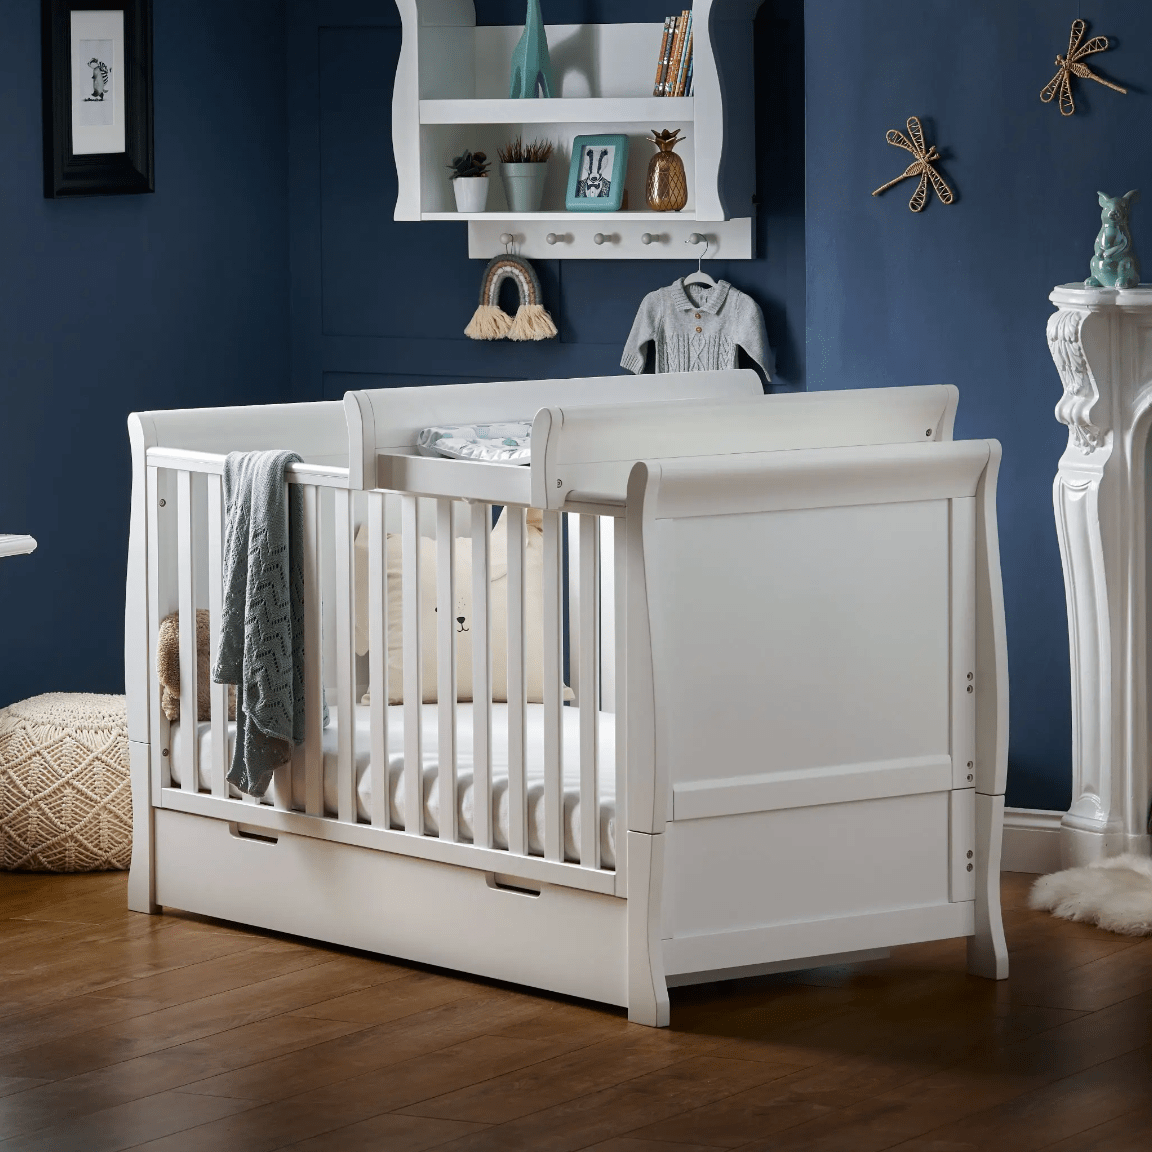 Obaby Nursery Furniture Obaby Stamford Cot Top Changer - Direct Delivery